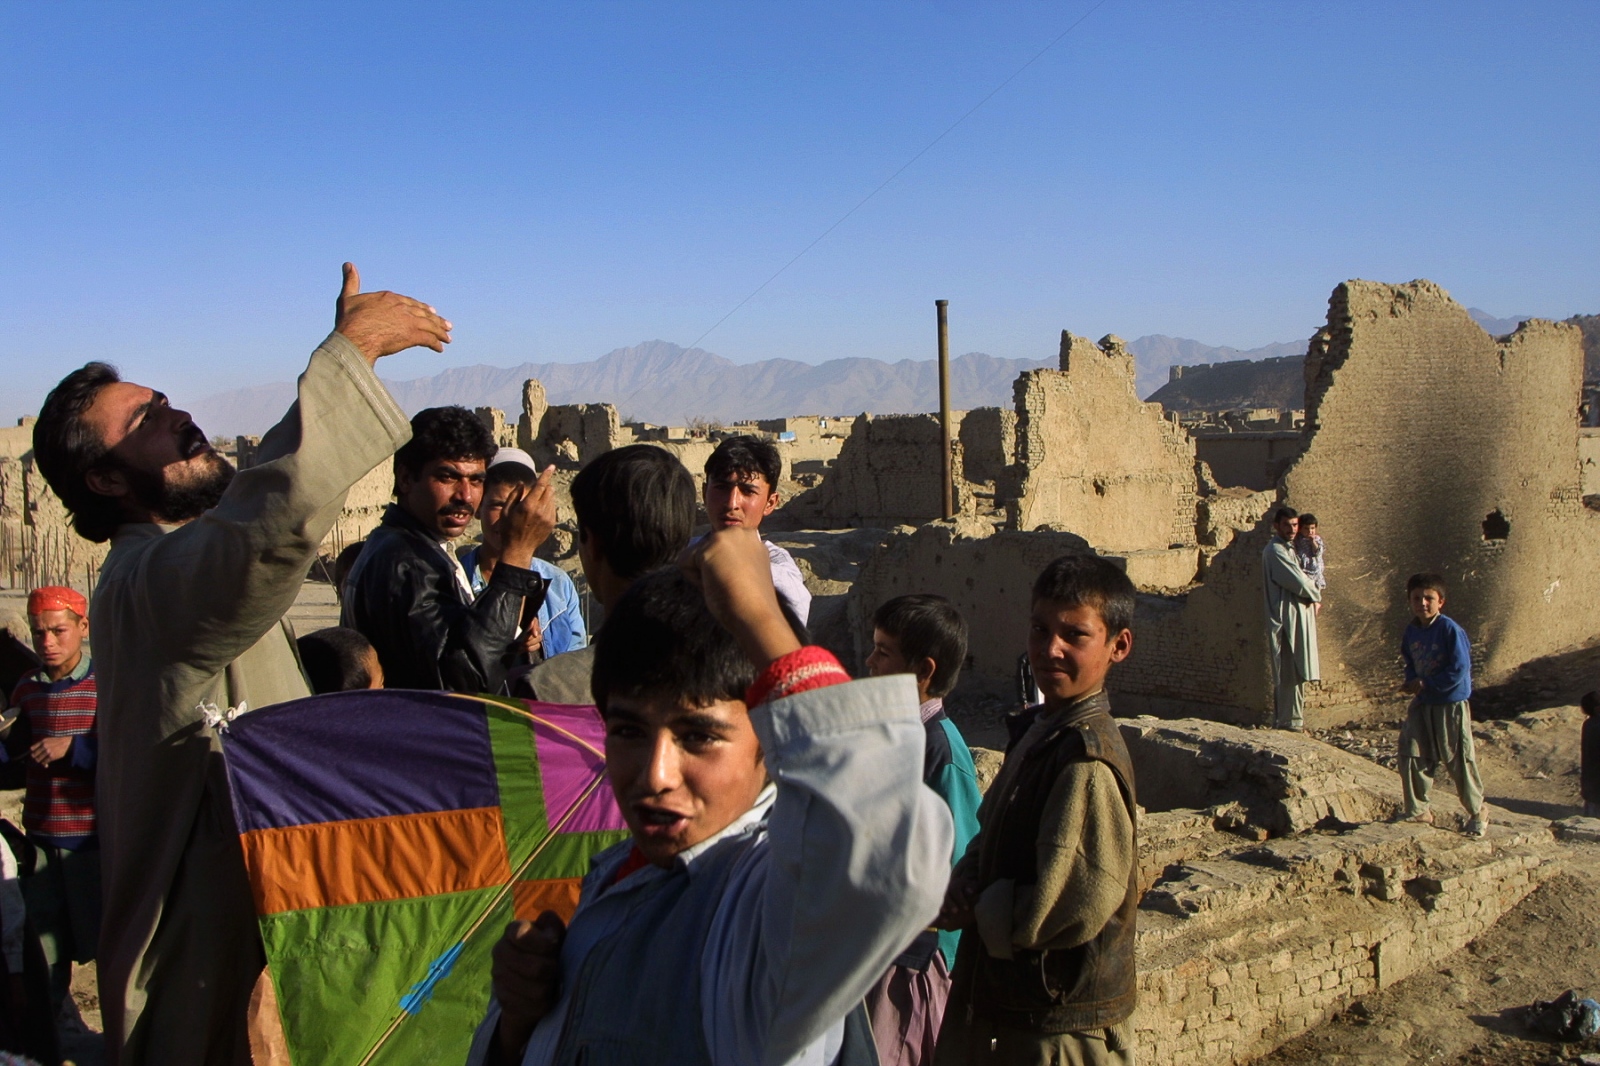 Onward to Kabul - The day after the defeat of the Taliban, kites, which had...